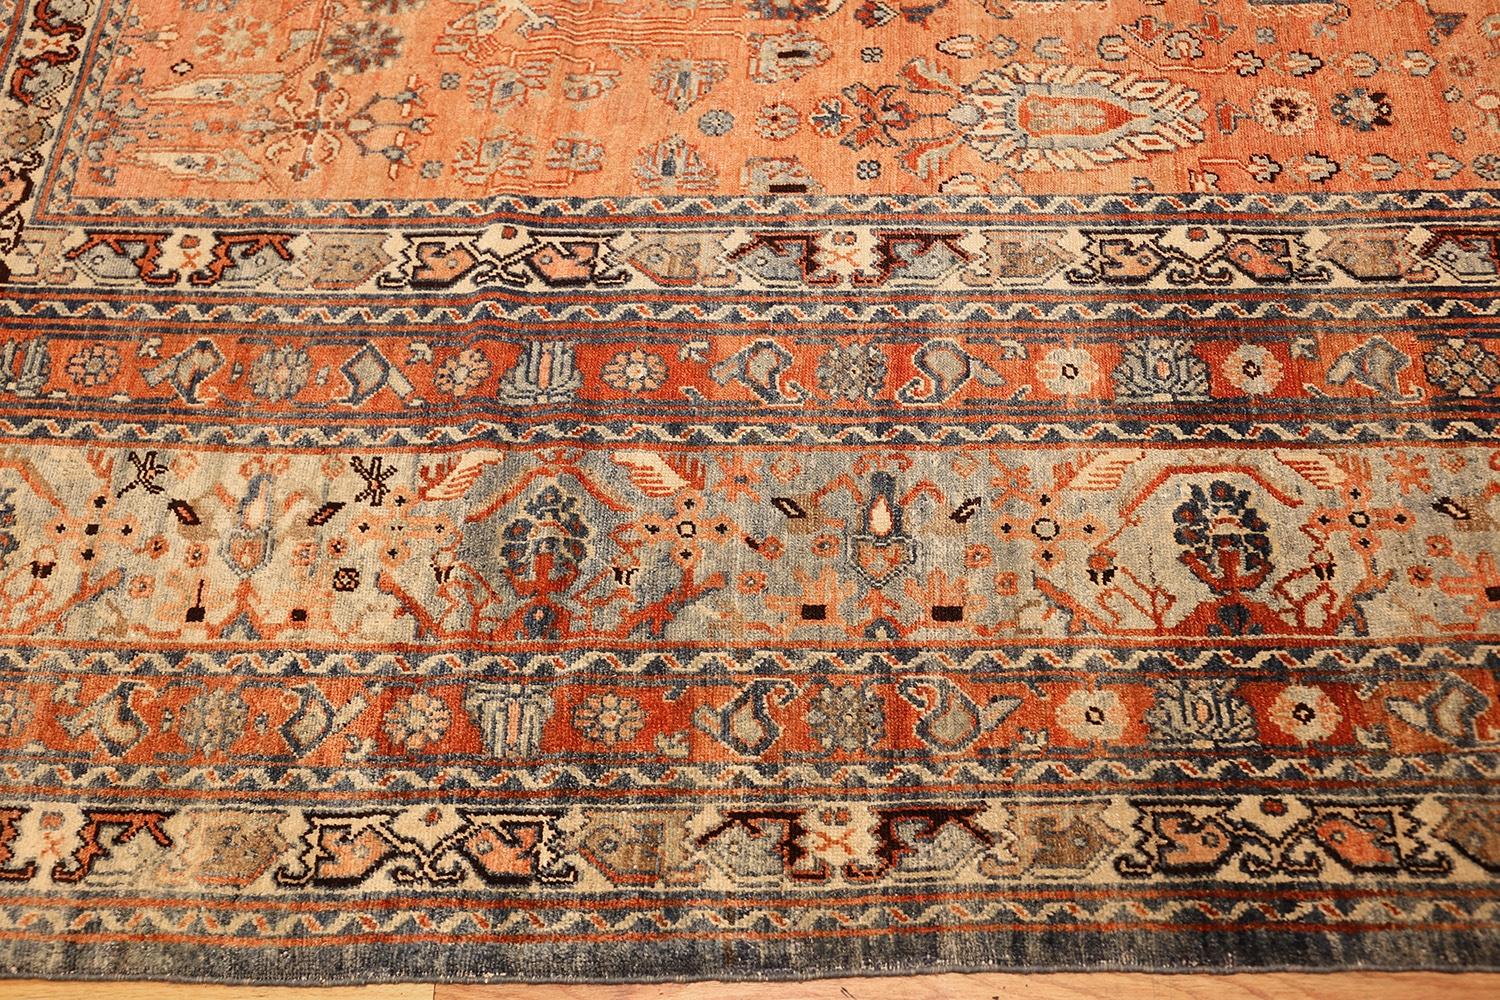 Tribal Antique Malayer Rug, Country of Origin / rug type: Persian Rugs, Circa Date: 1920 - Size: 10 ft 8 in x 14 ft 7 in (3.25 m x 4.44 m).